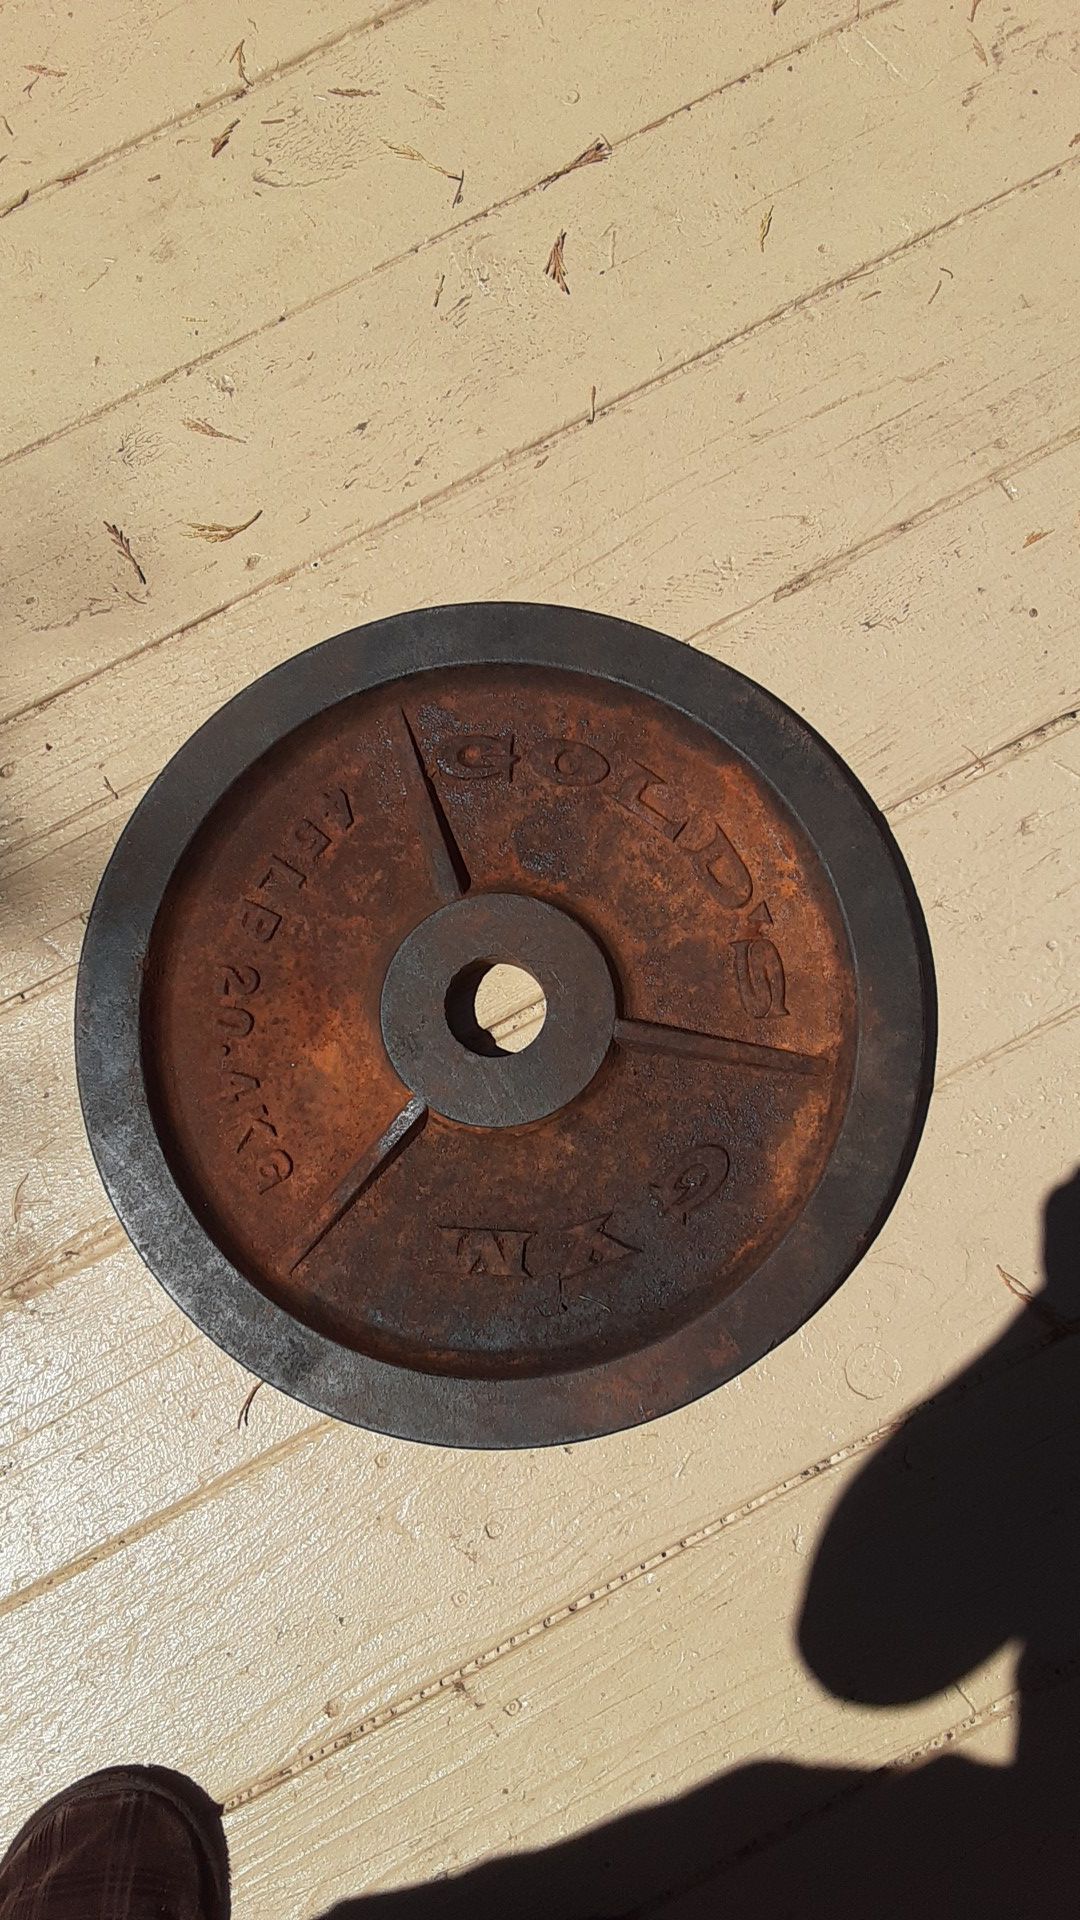 45 Pound Olympic plate (2 inches)